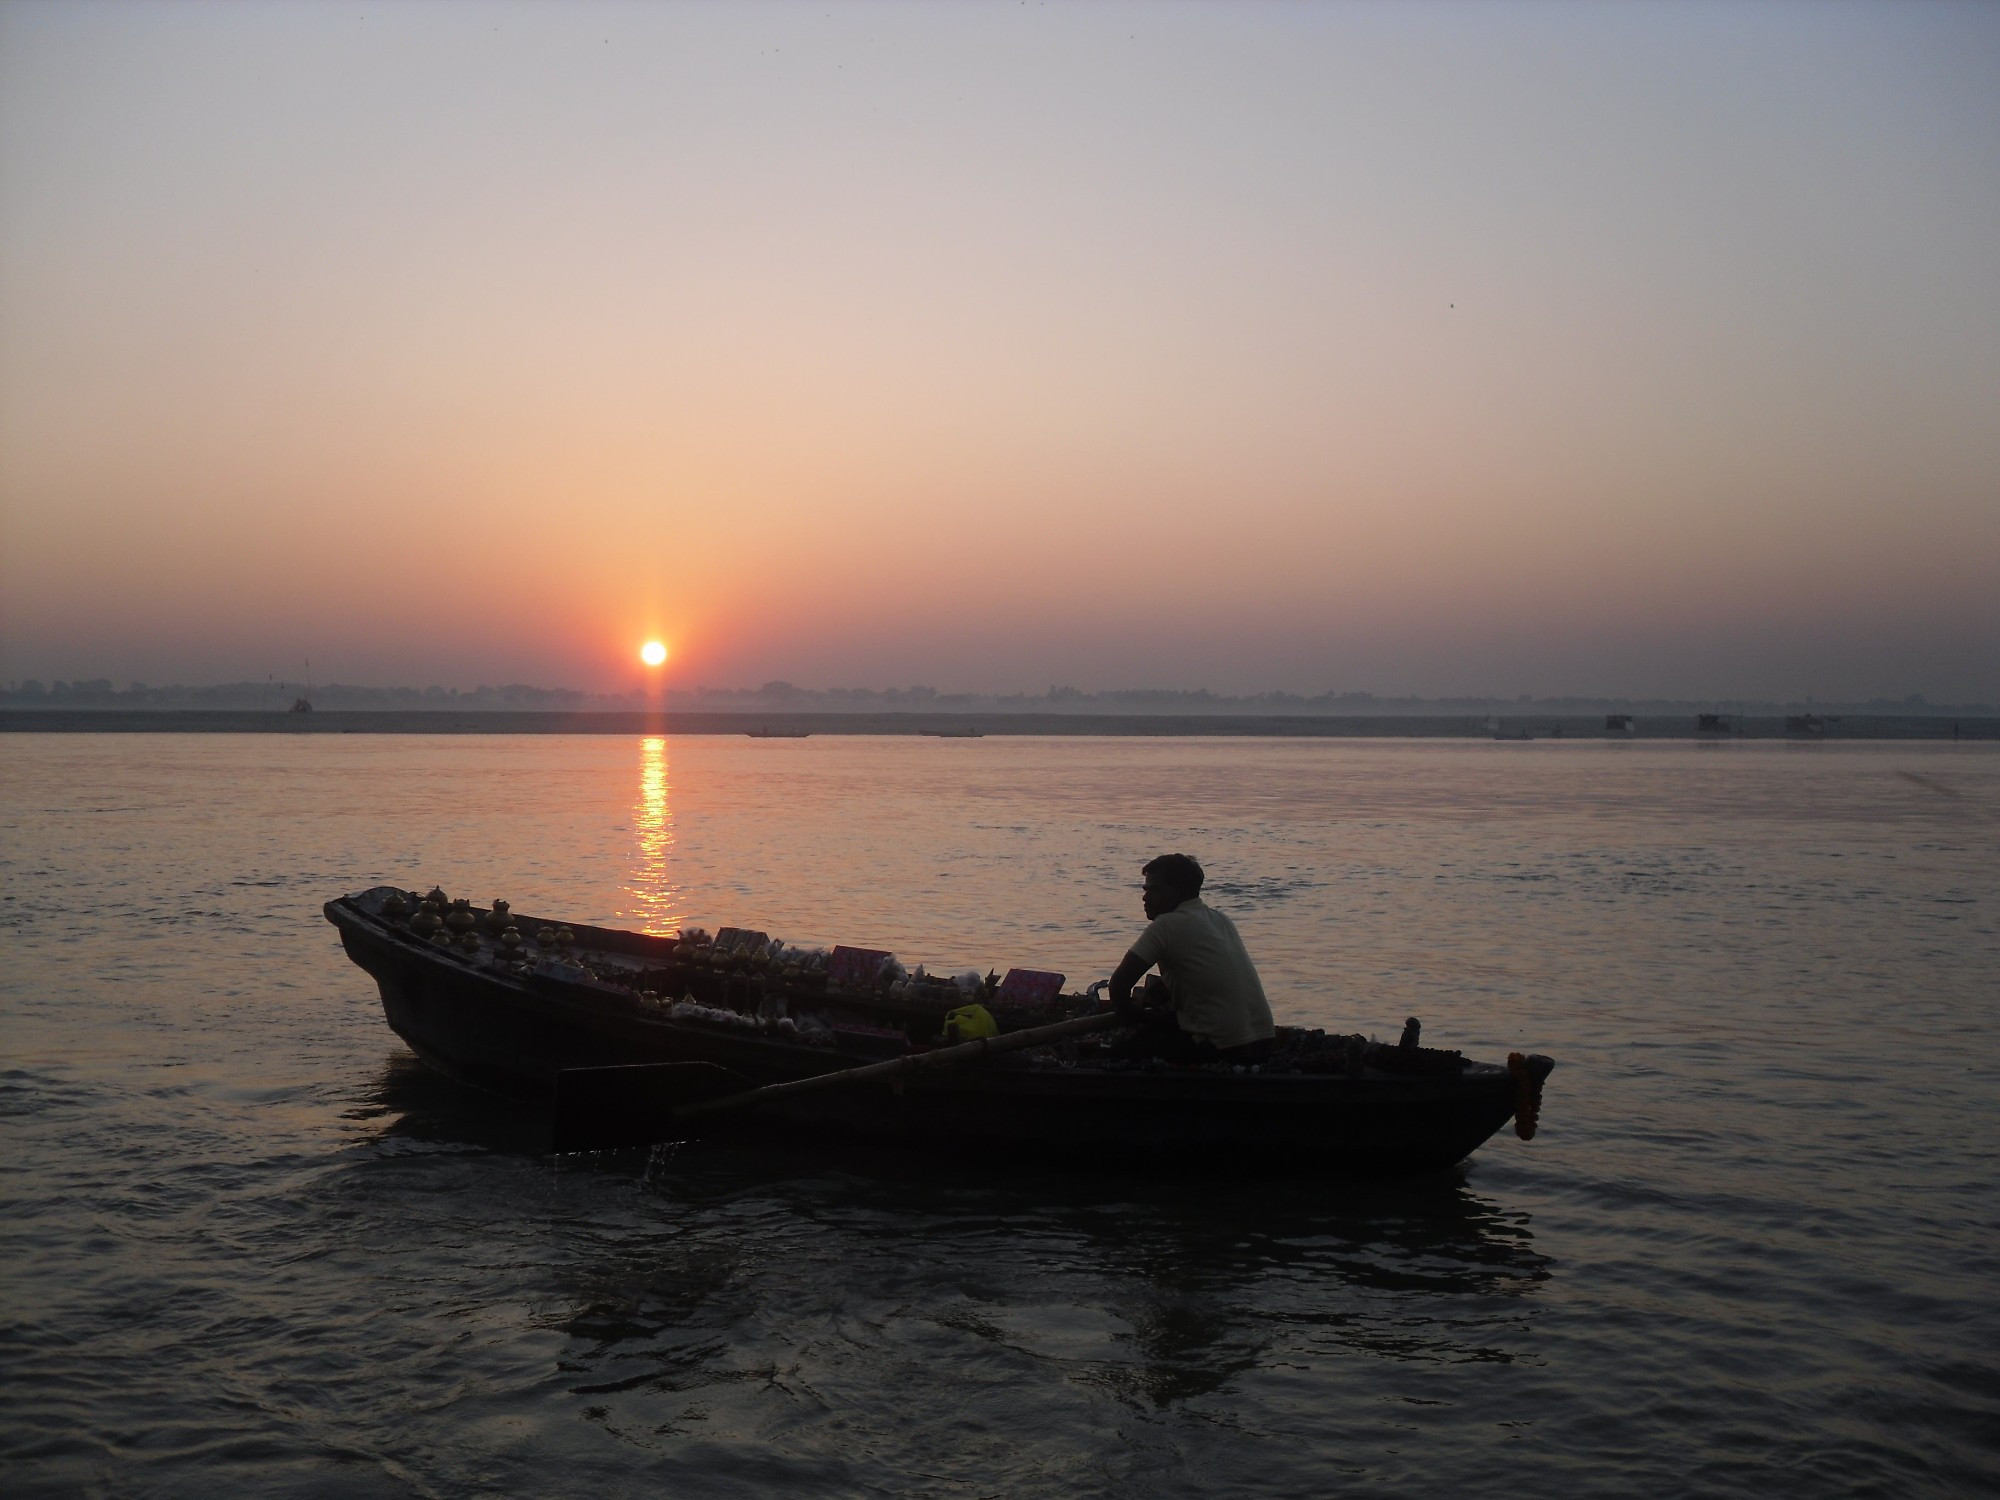 On a boat to watch the sunrise over the River Ganges, Varanasi, India 